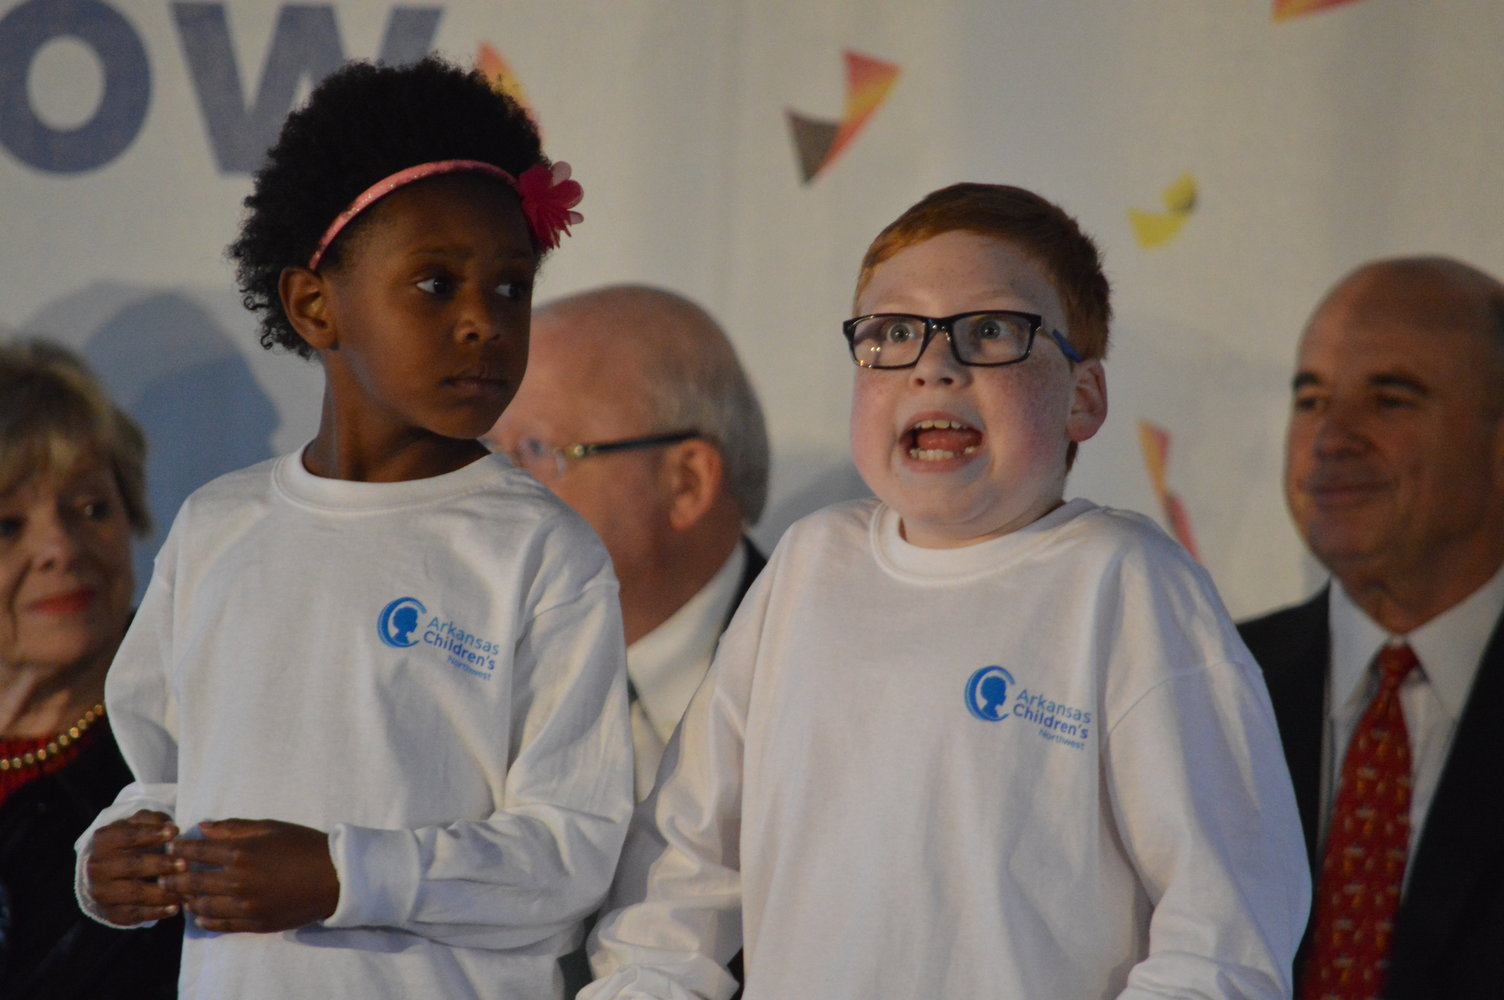 The children who receive services from Arkansas Children’s Hospital Northwest participated in the January ceremonies celebrating the opening of the new hospital.